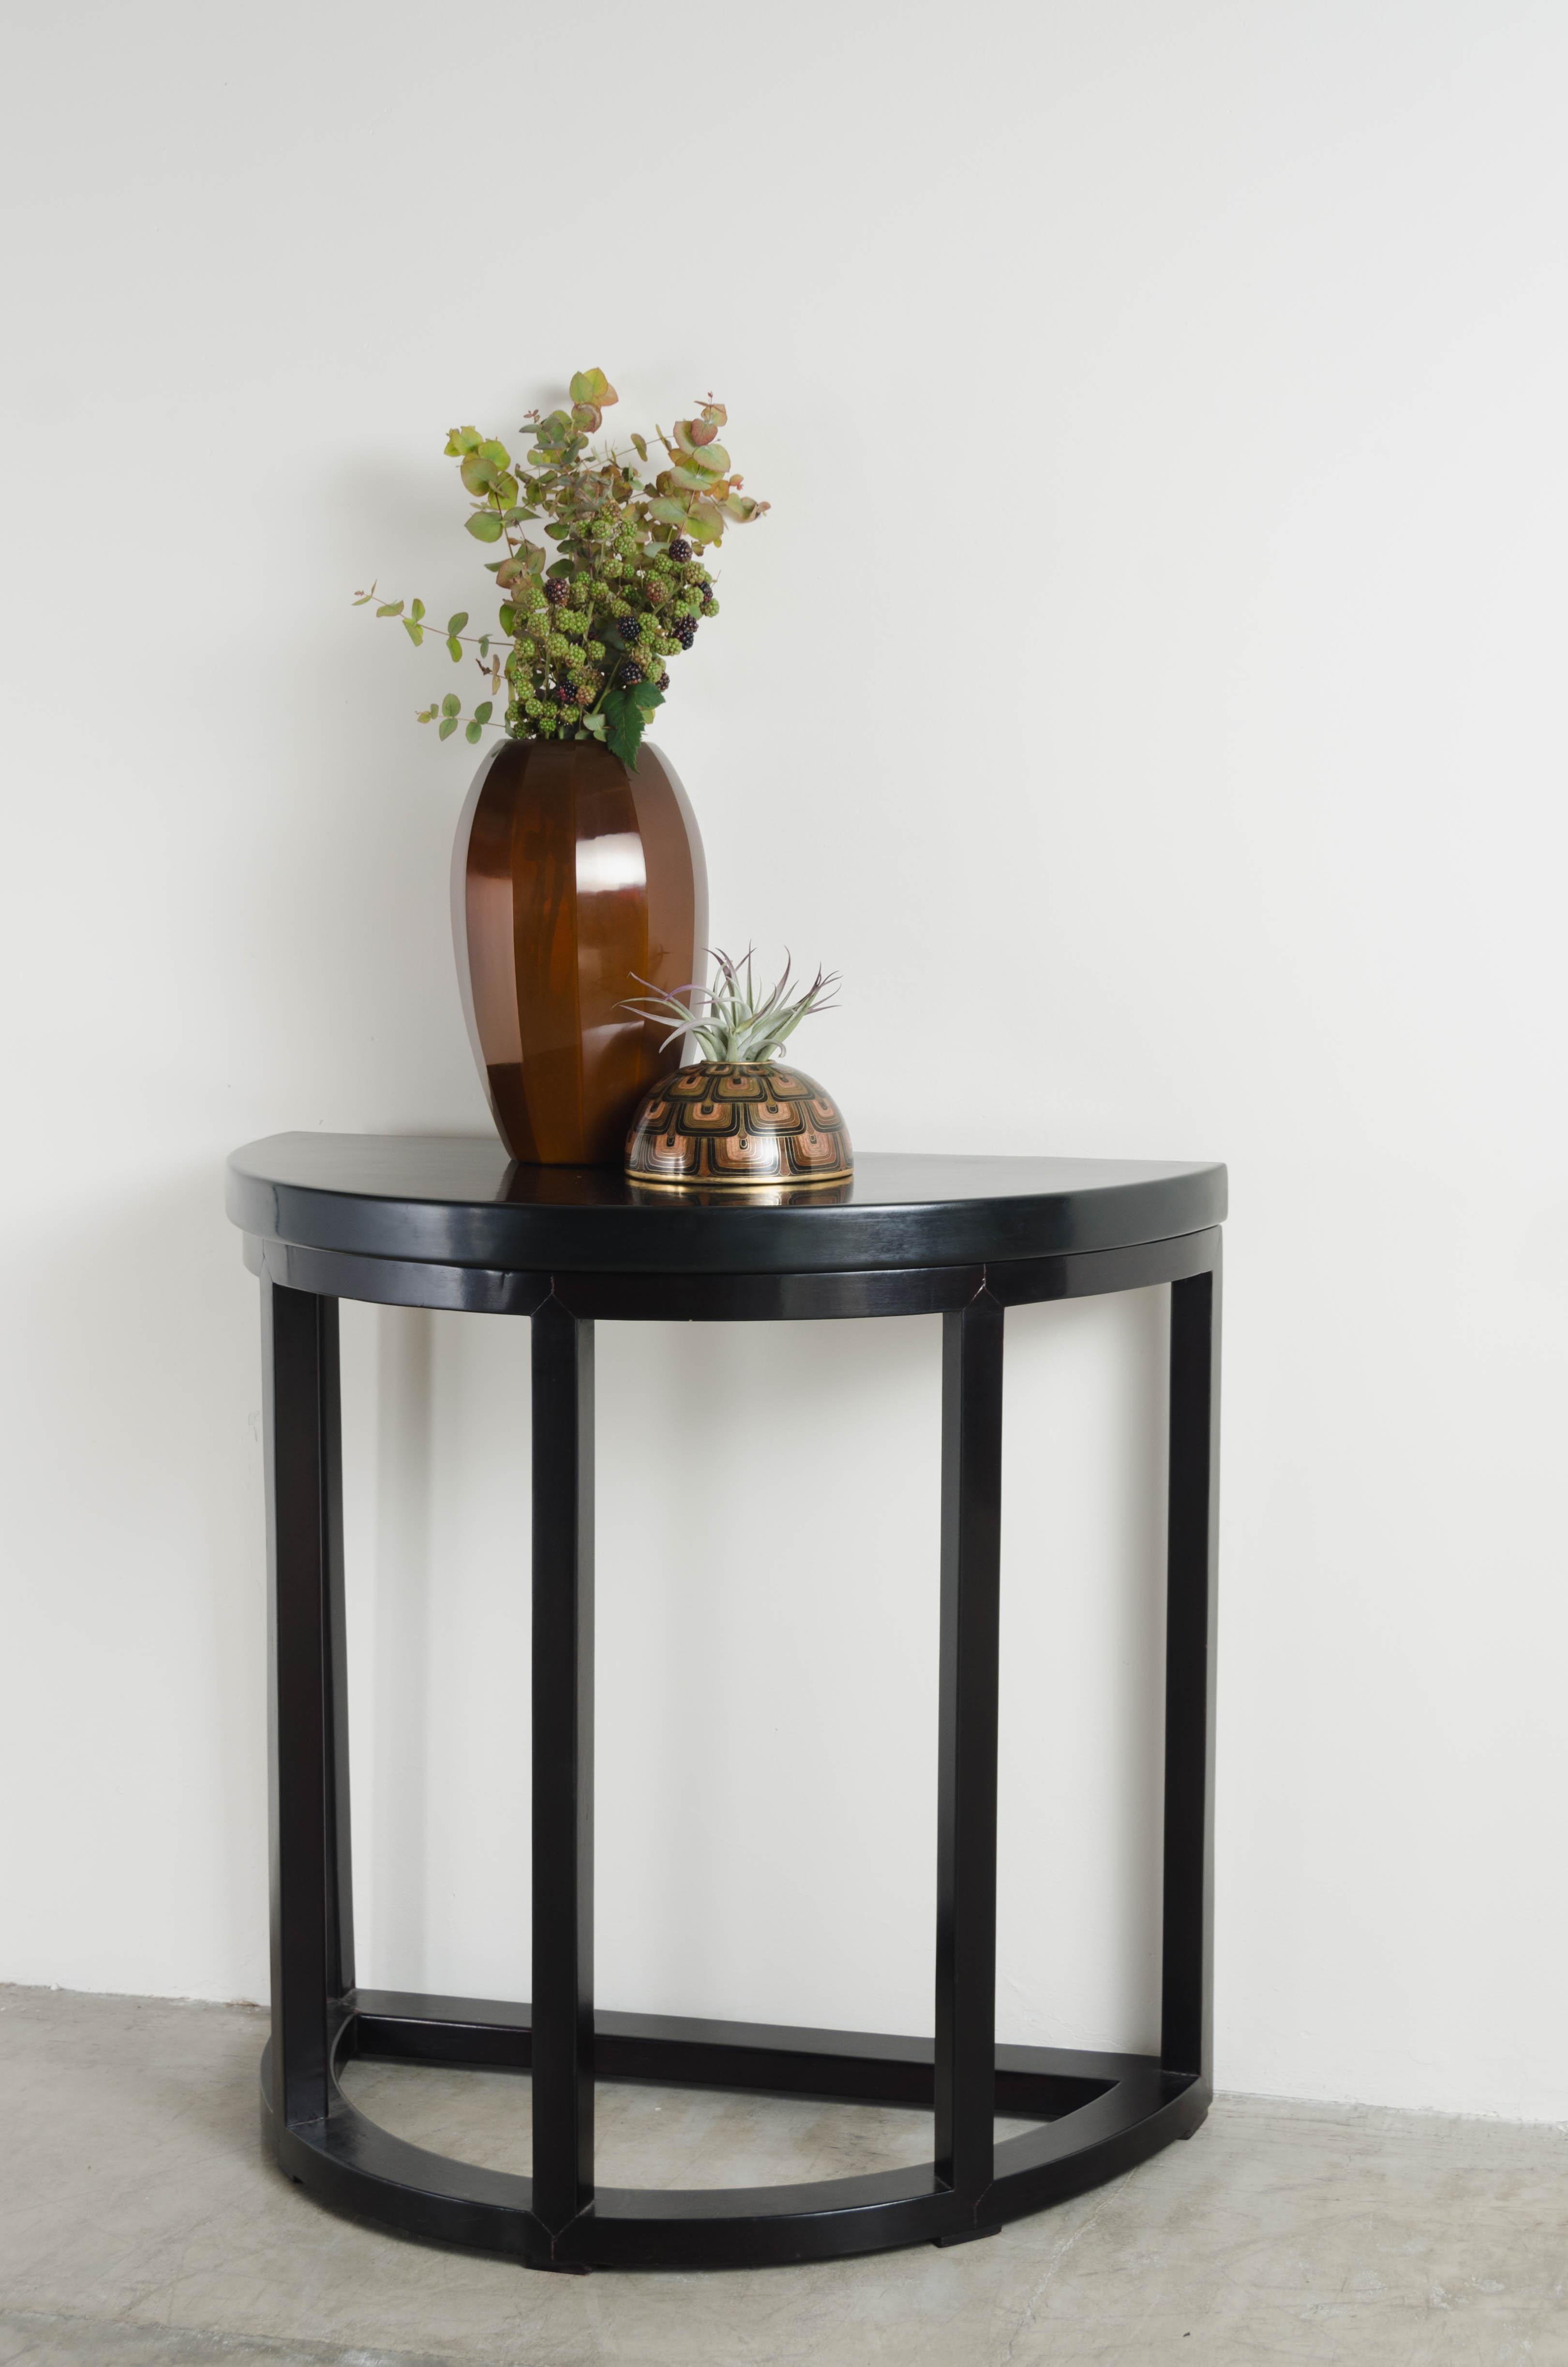 Half Round Table, Black Lacquer by Robert Kuo, Handmade, Limited Edition For Sale 1